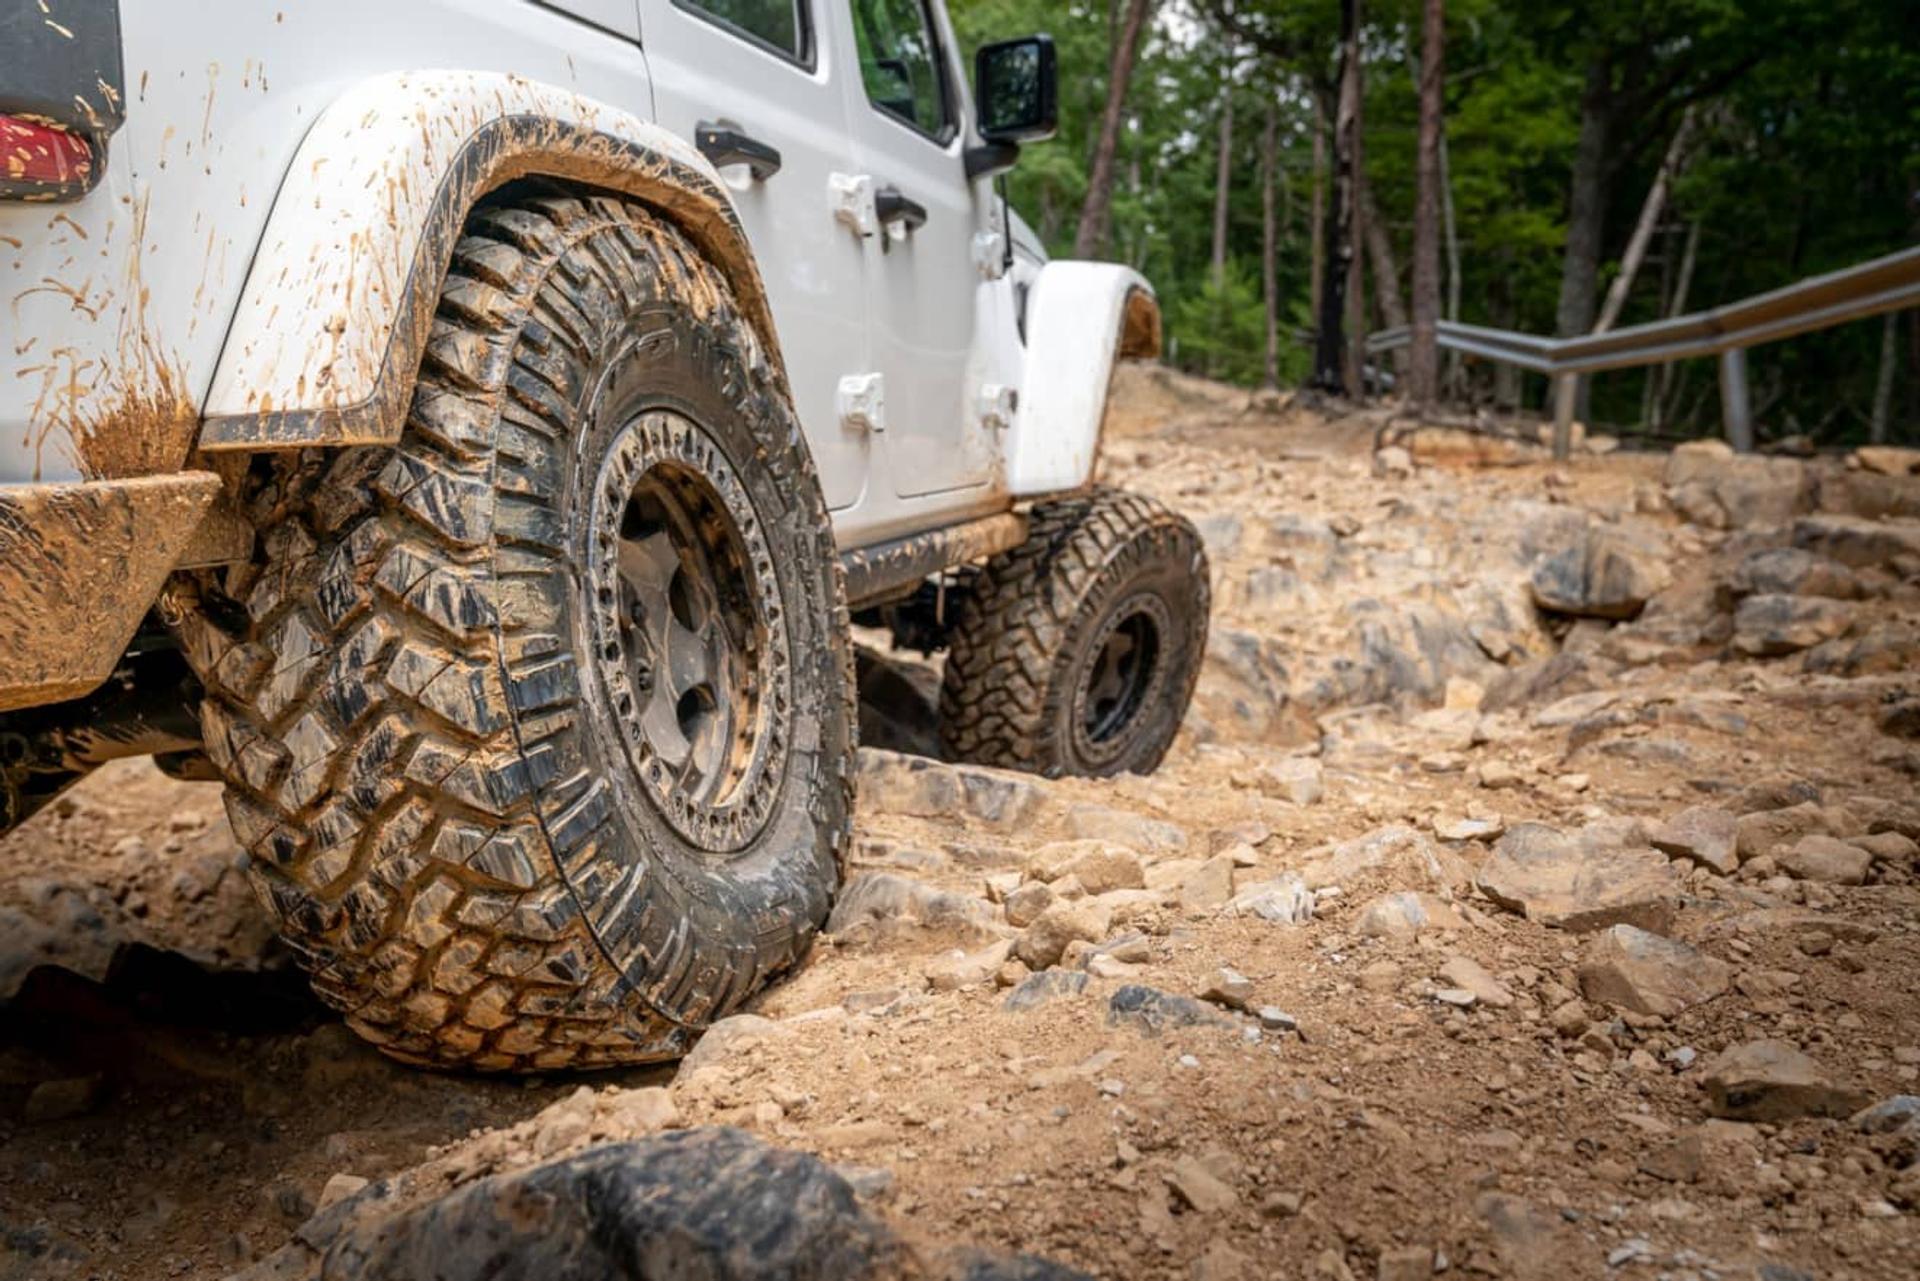 004-airing-down-tires-for-off-road-driving-nitto-trail-grappler-beadlock-wheels.jpg